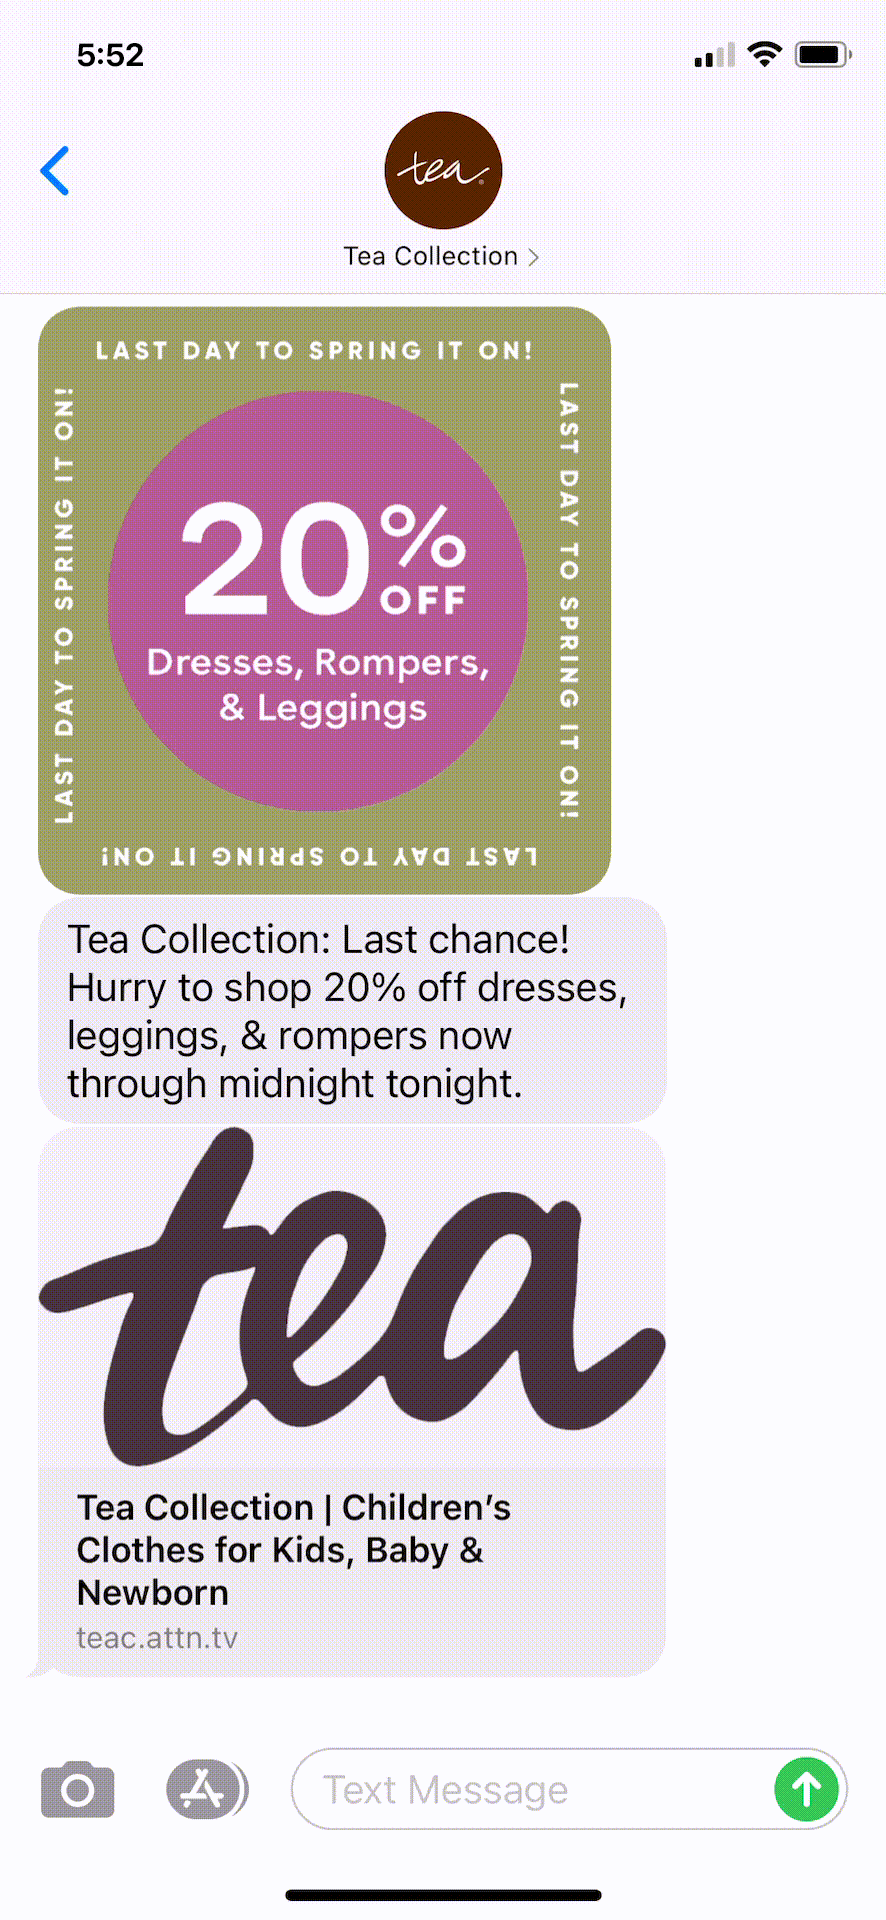 Tea-Collection-Text-Message-Marketing-Example-04.11.2021